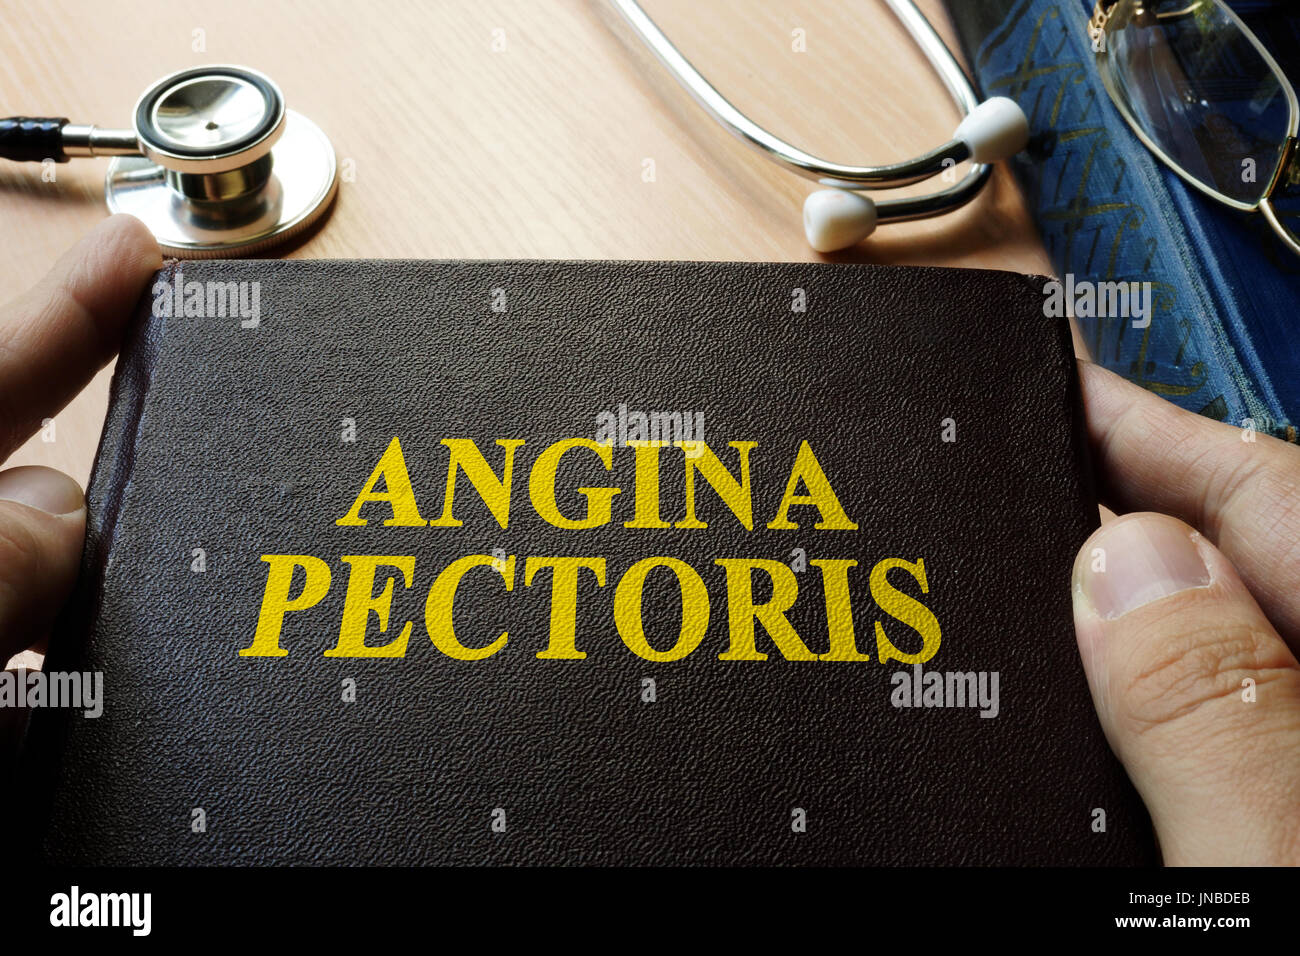 Title Angina pectoris on a book which holding doctor. Stock Photo